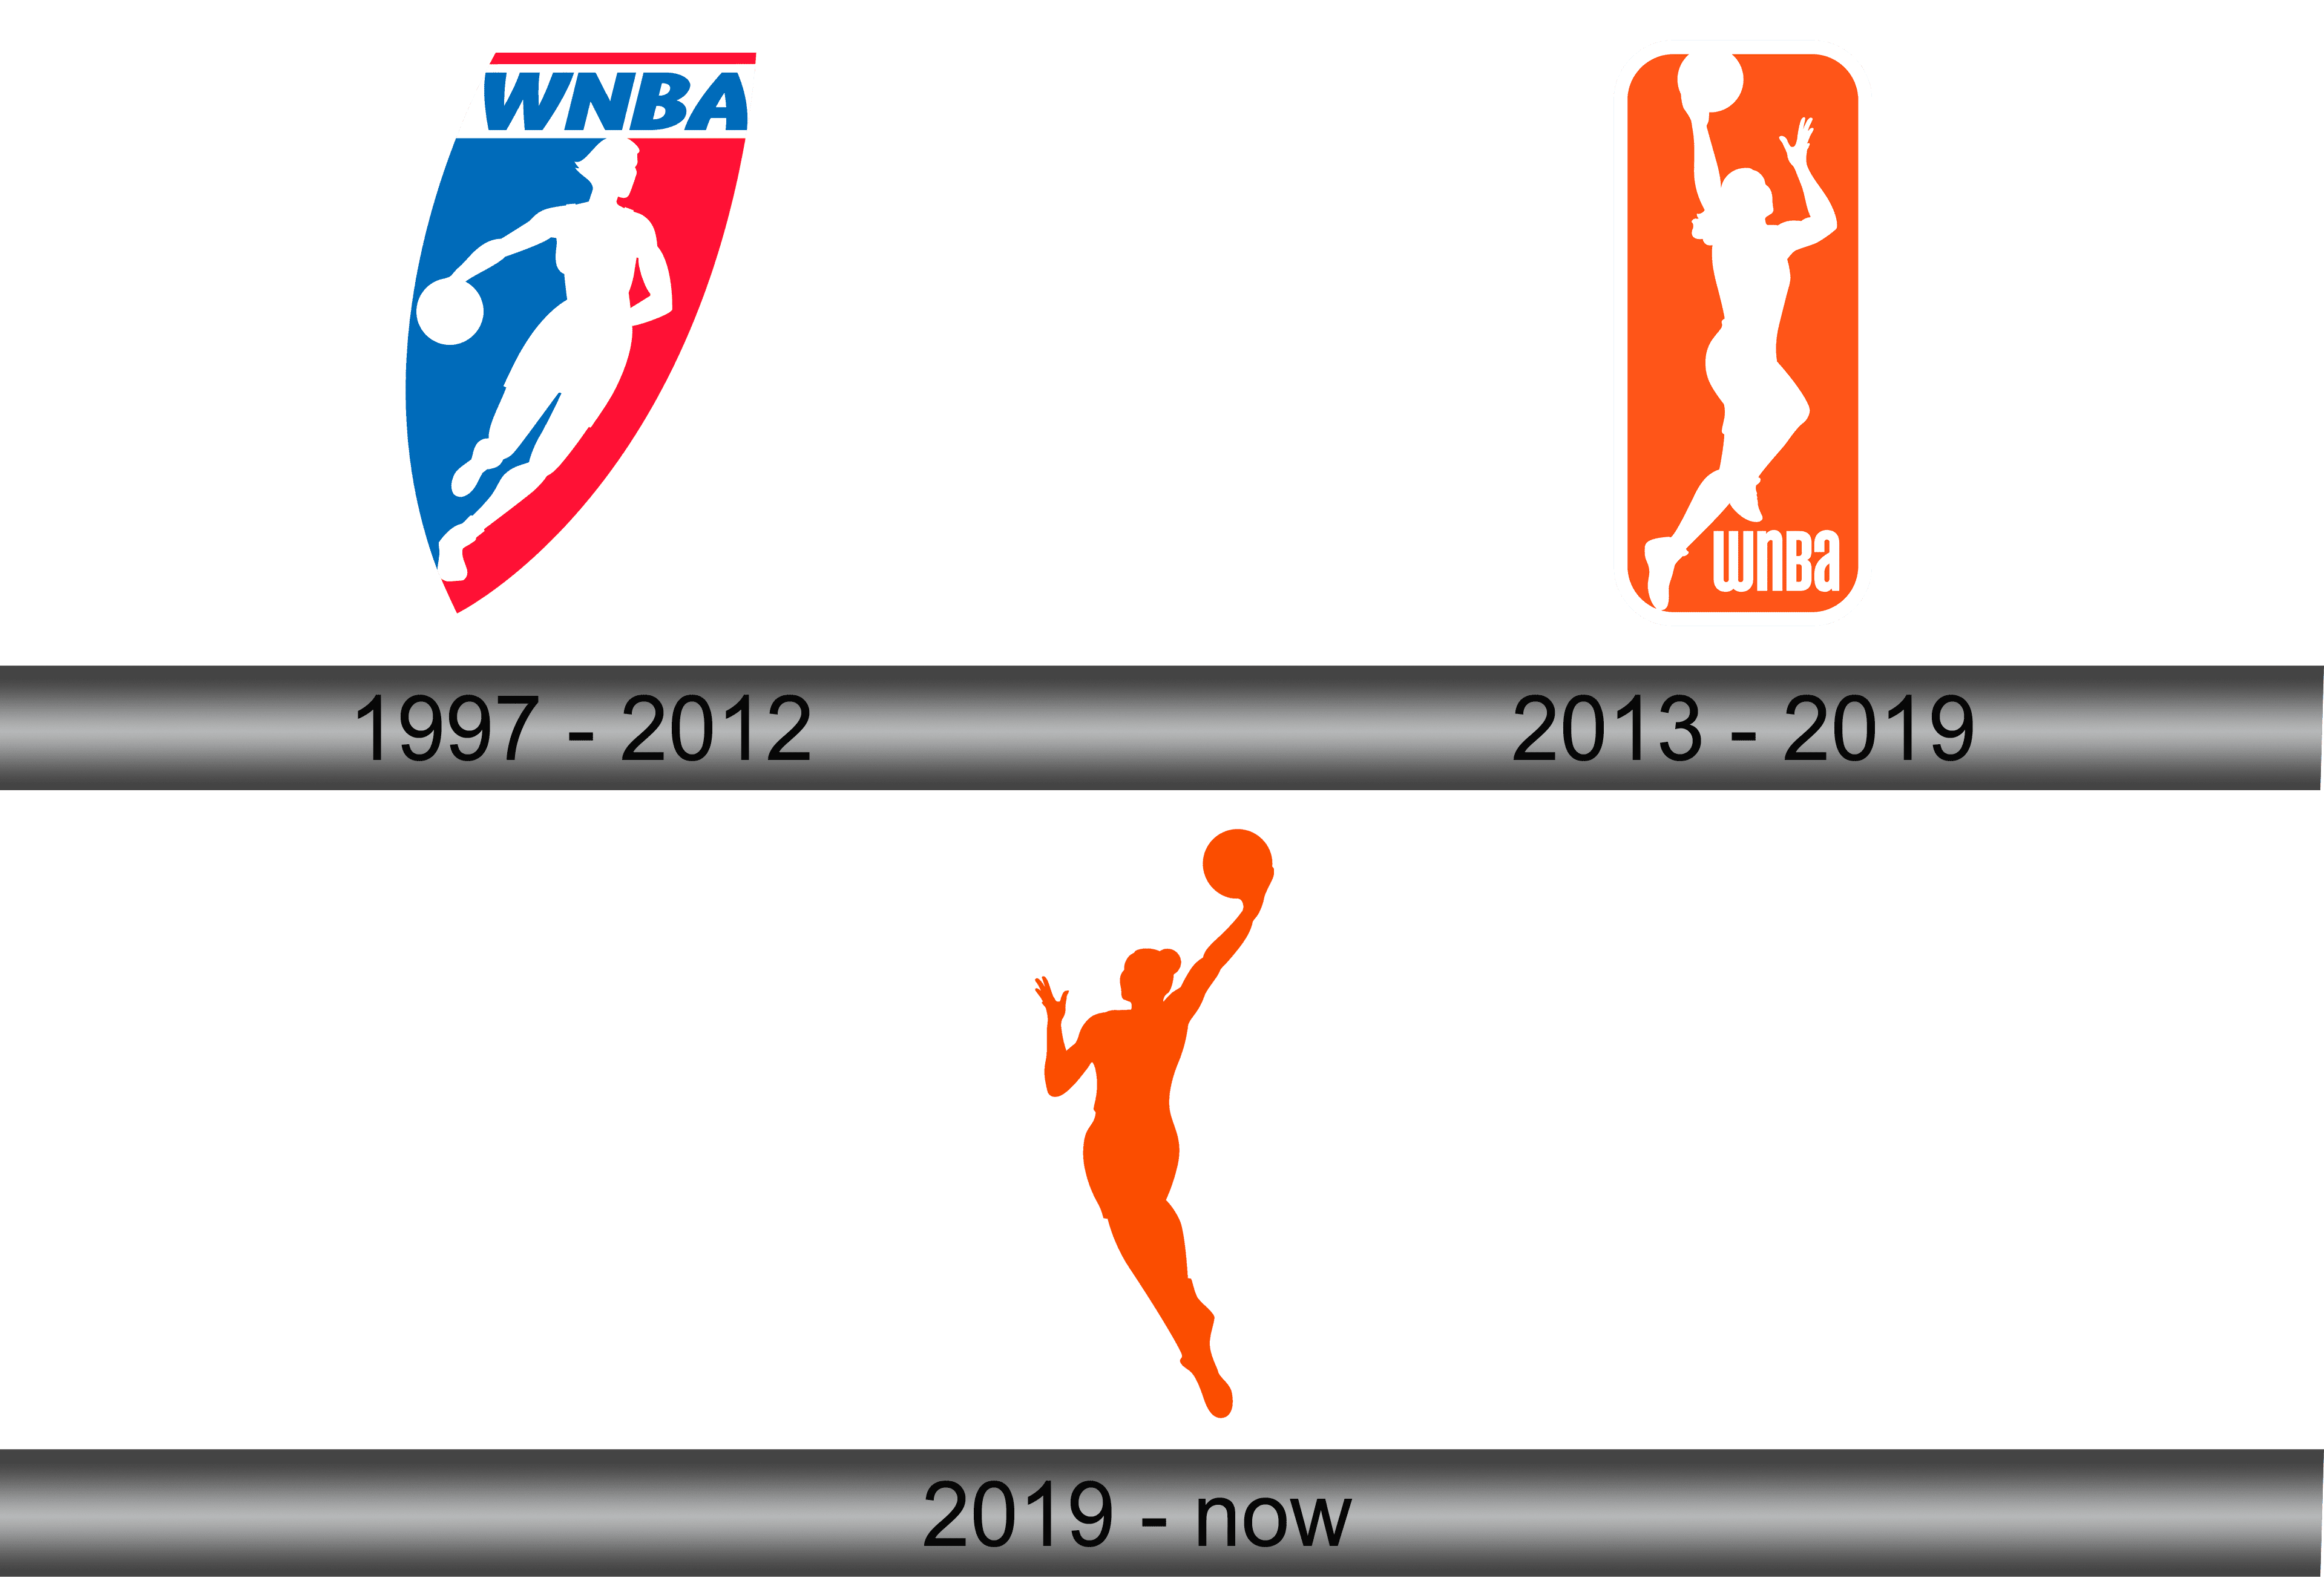 WNBA Logo and symbol, meaning, history, sign.